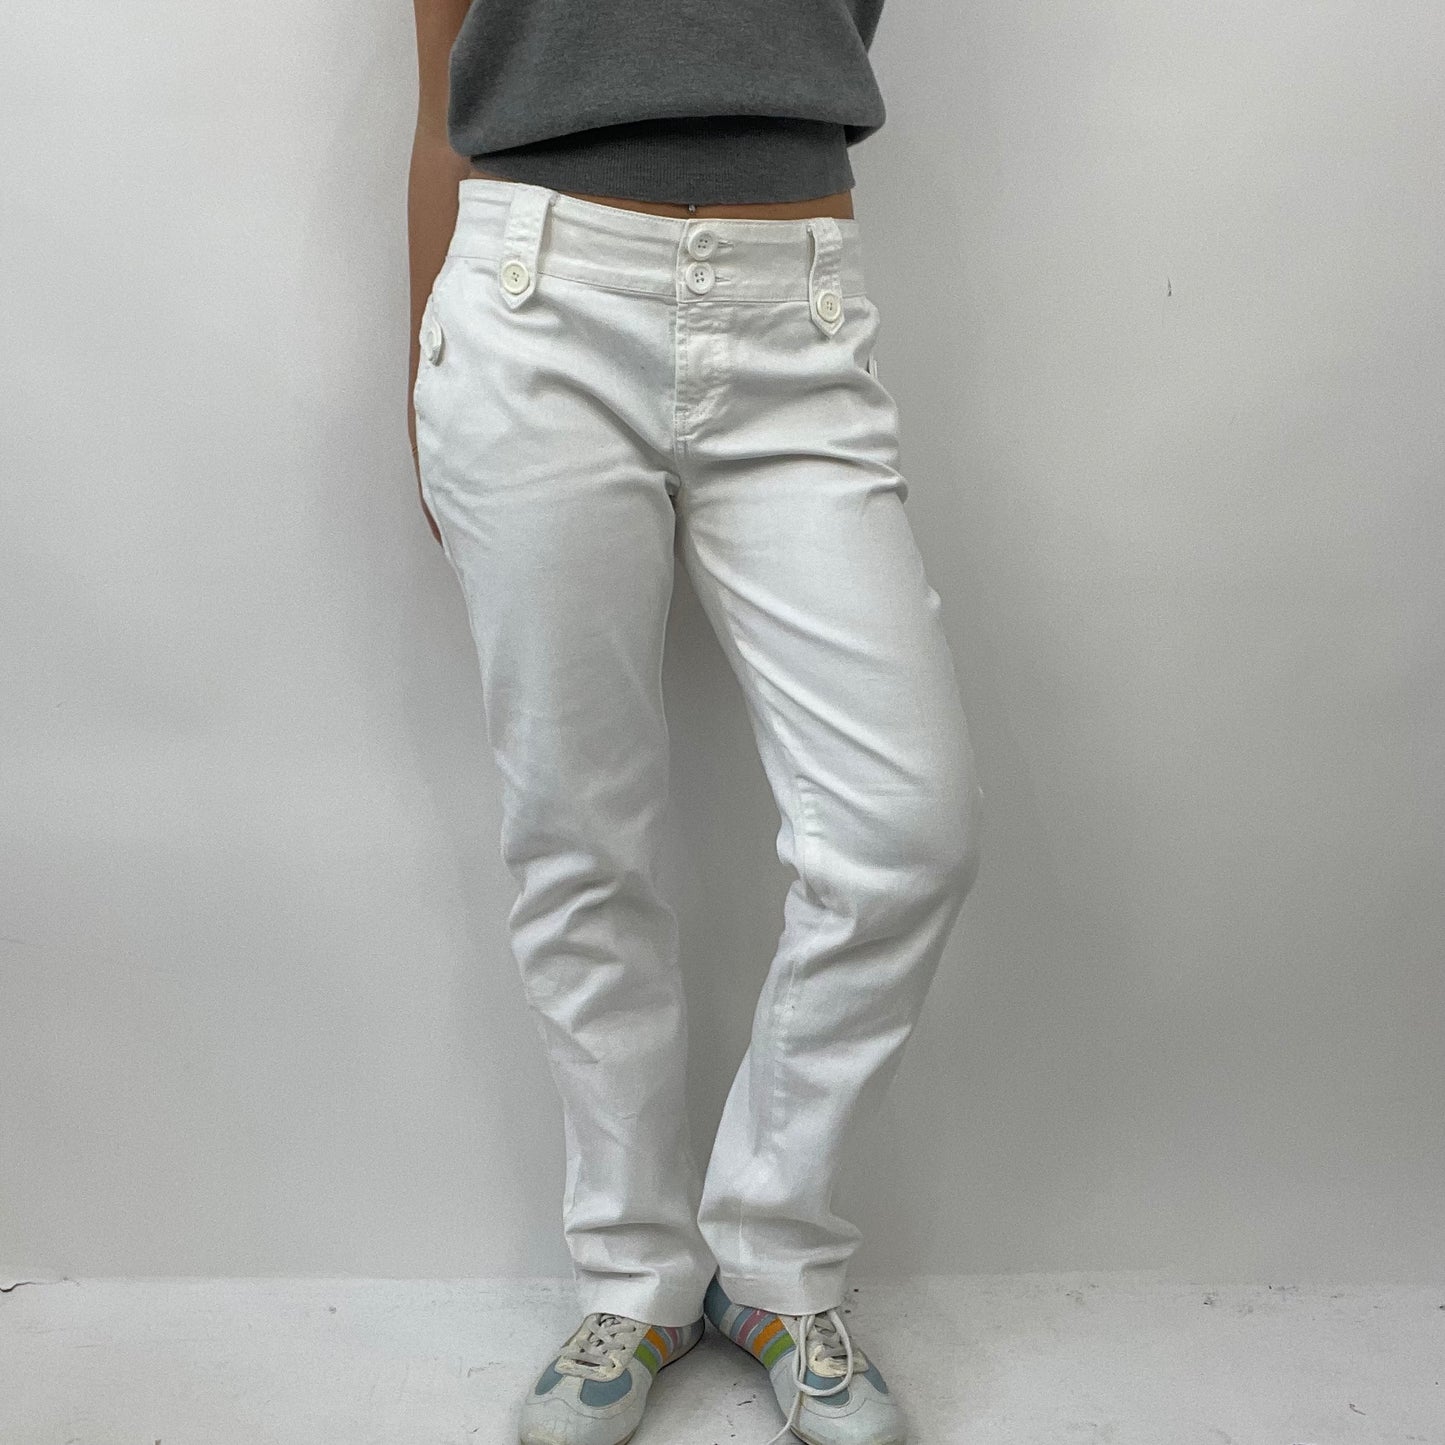 QUIET LUXURY DROP | small white jeans with double button detail